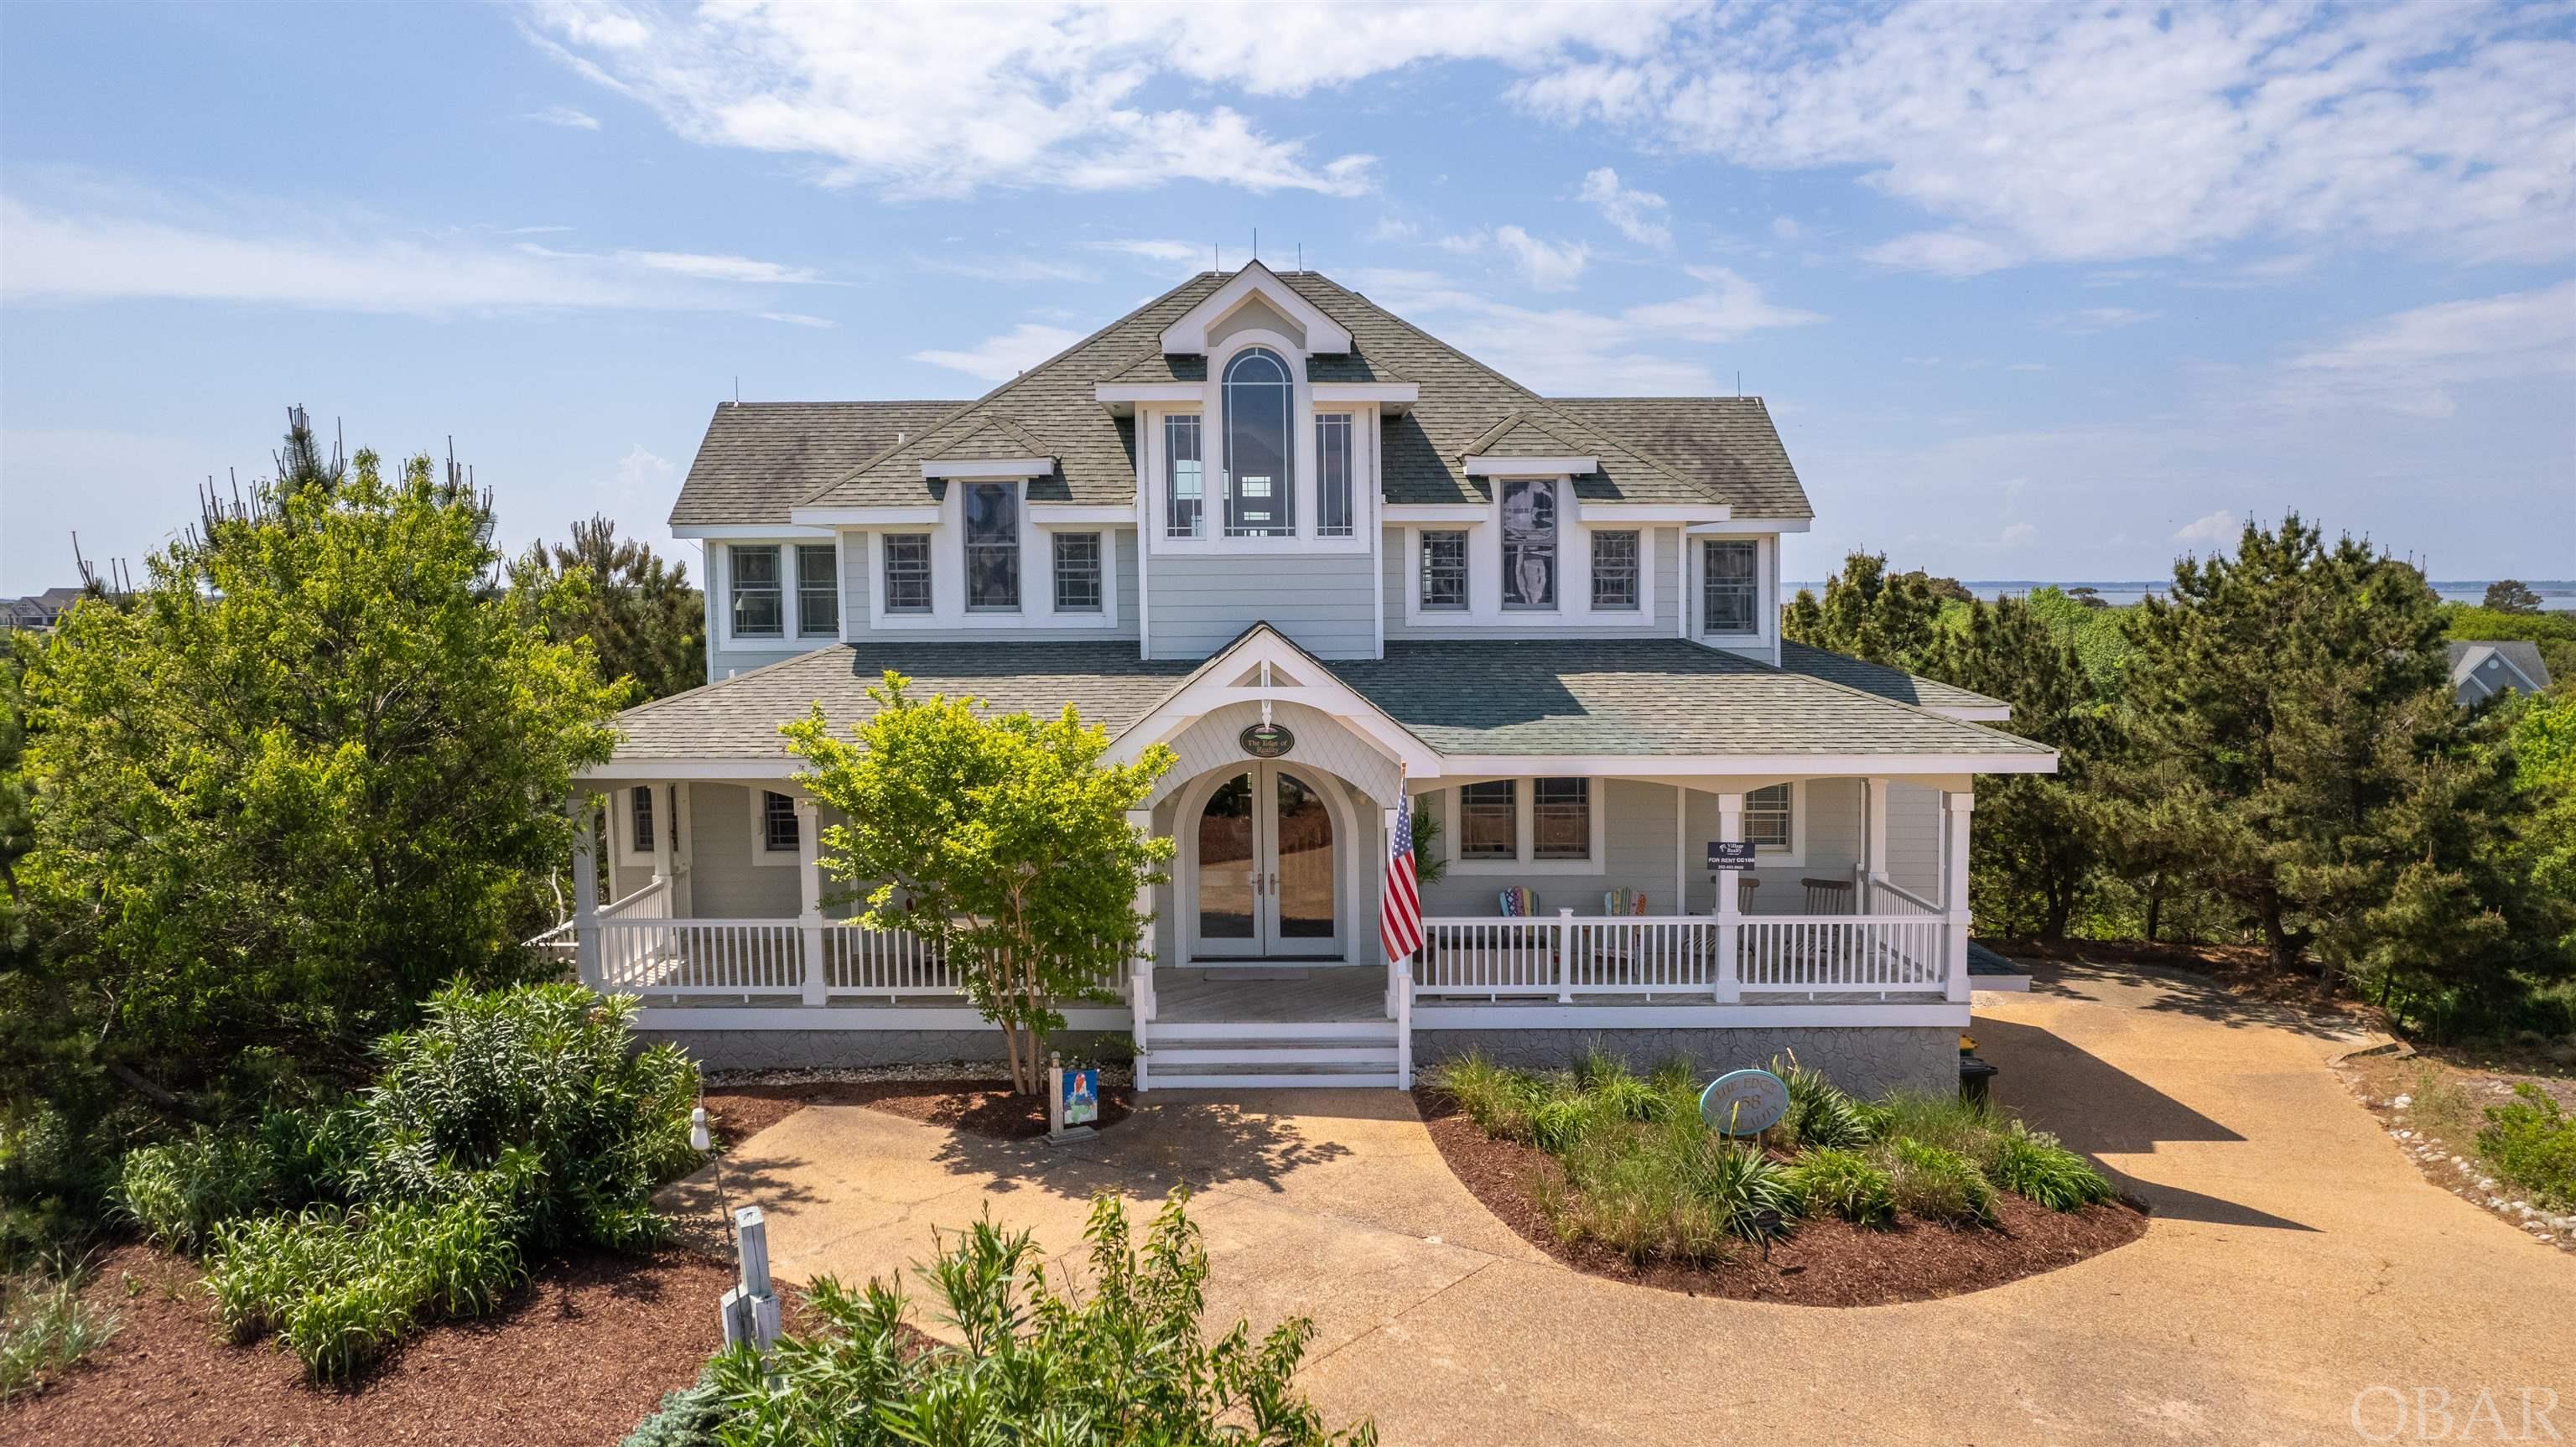 658 Loblolly Court, Corolla, NC 27927, 5 Bedrooms Bedrooms, ,4 BathroomsBathrooms,Residential,For sale,Loblolly Court,125598